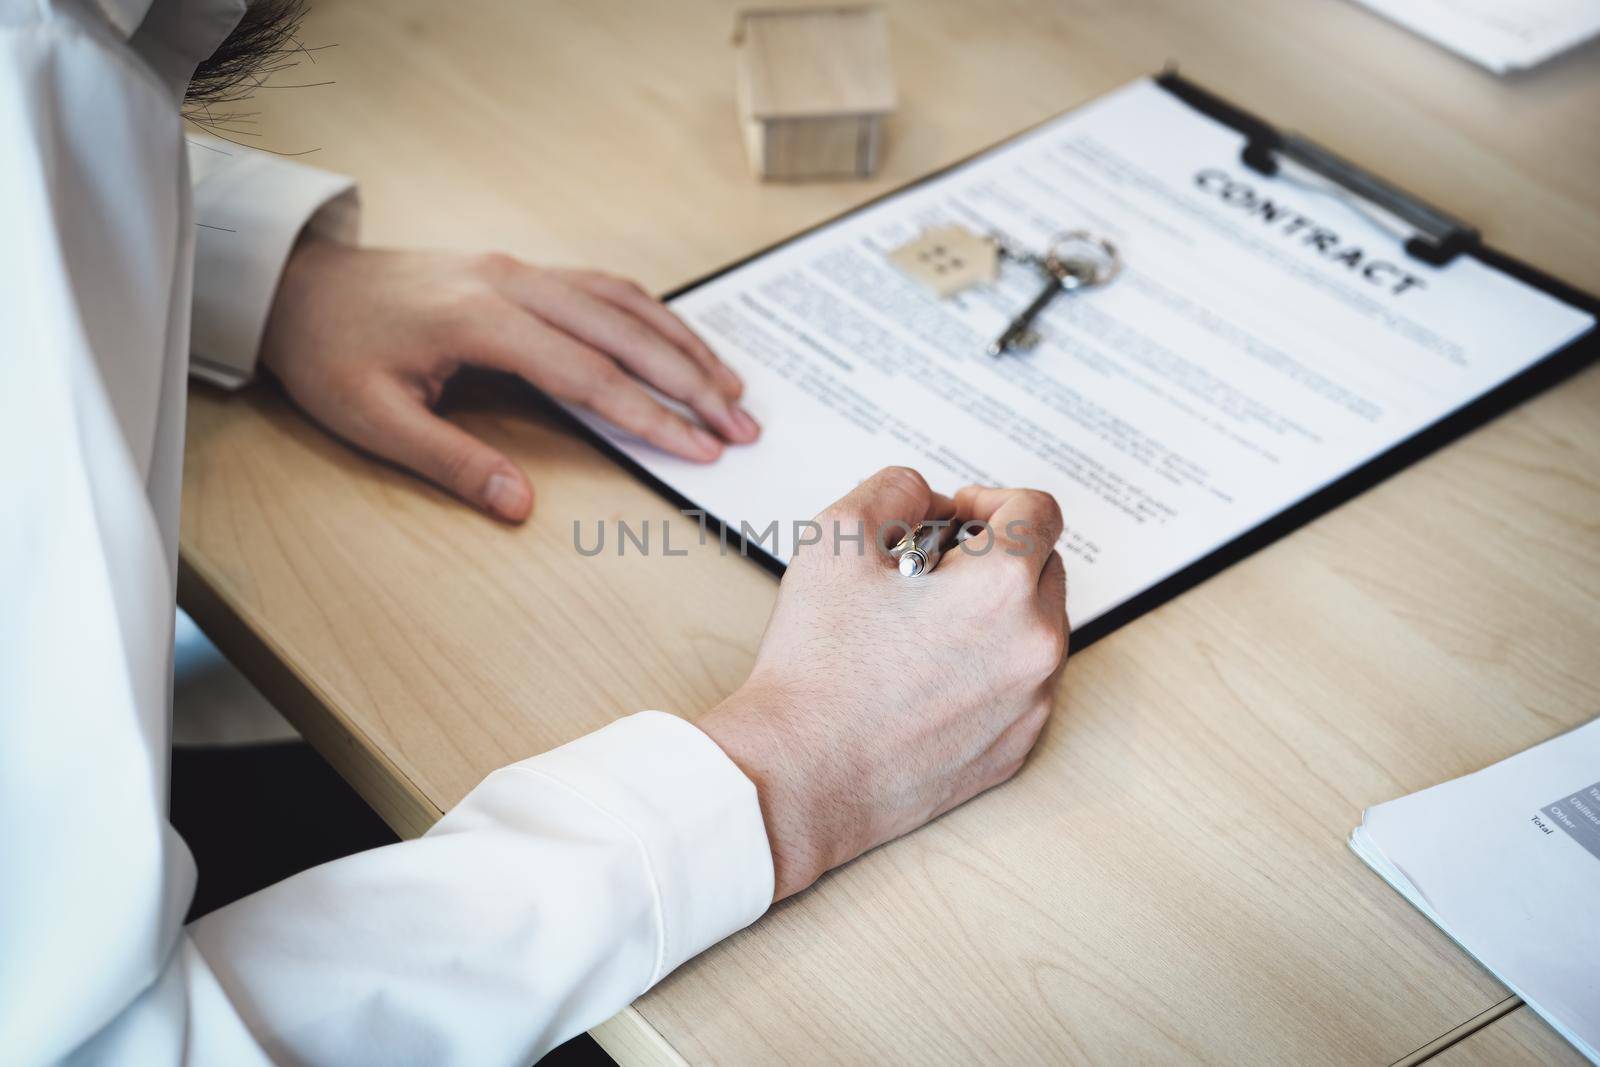 The customer is holding a pen and is reading the housing purchase contract before signing it